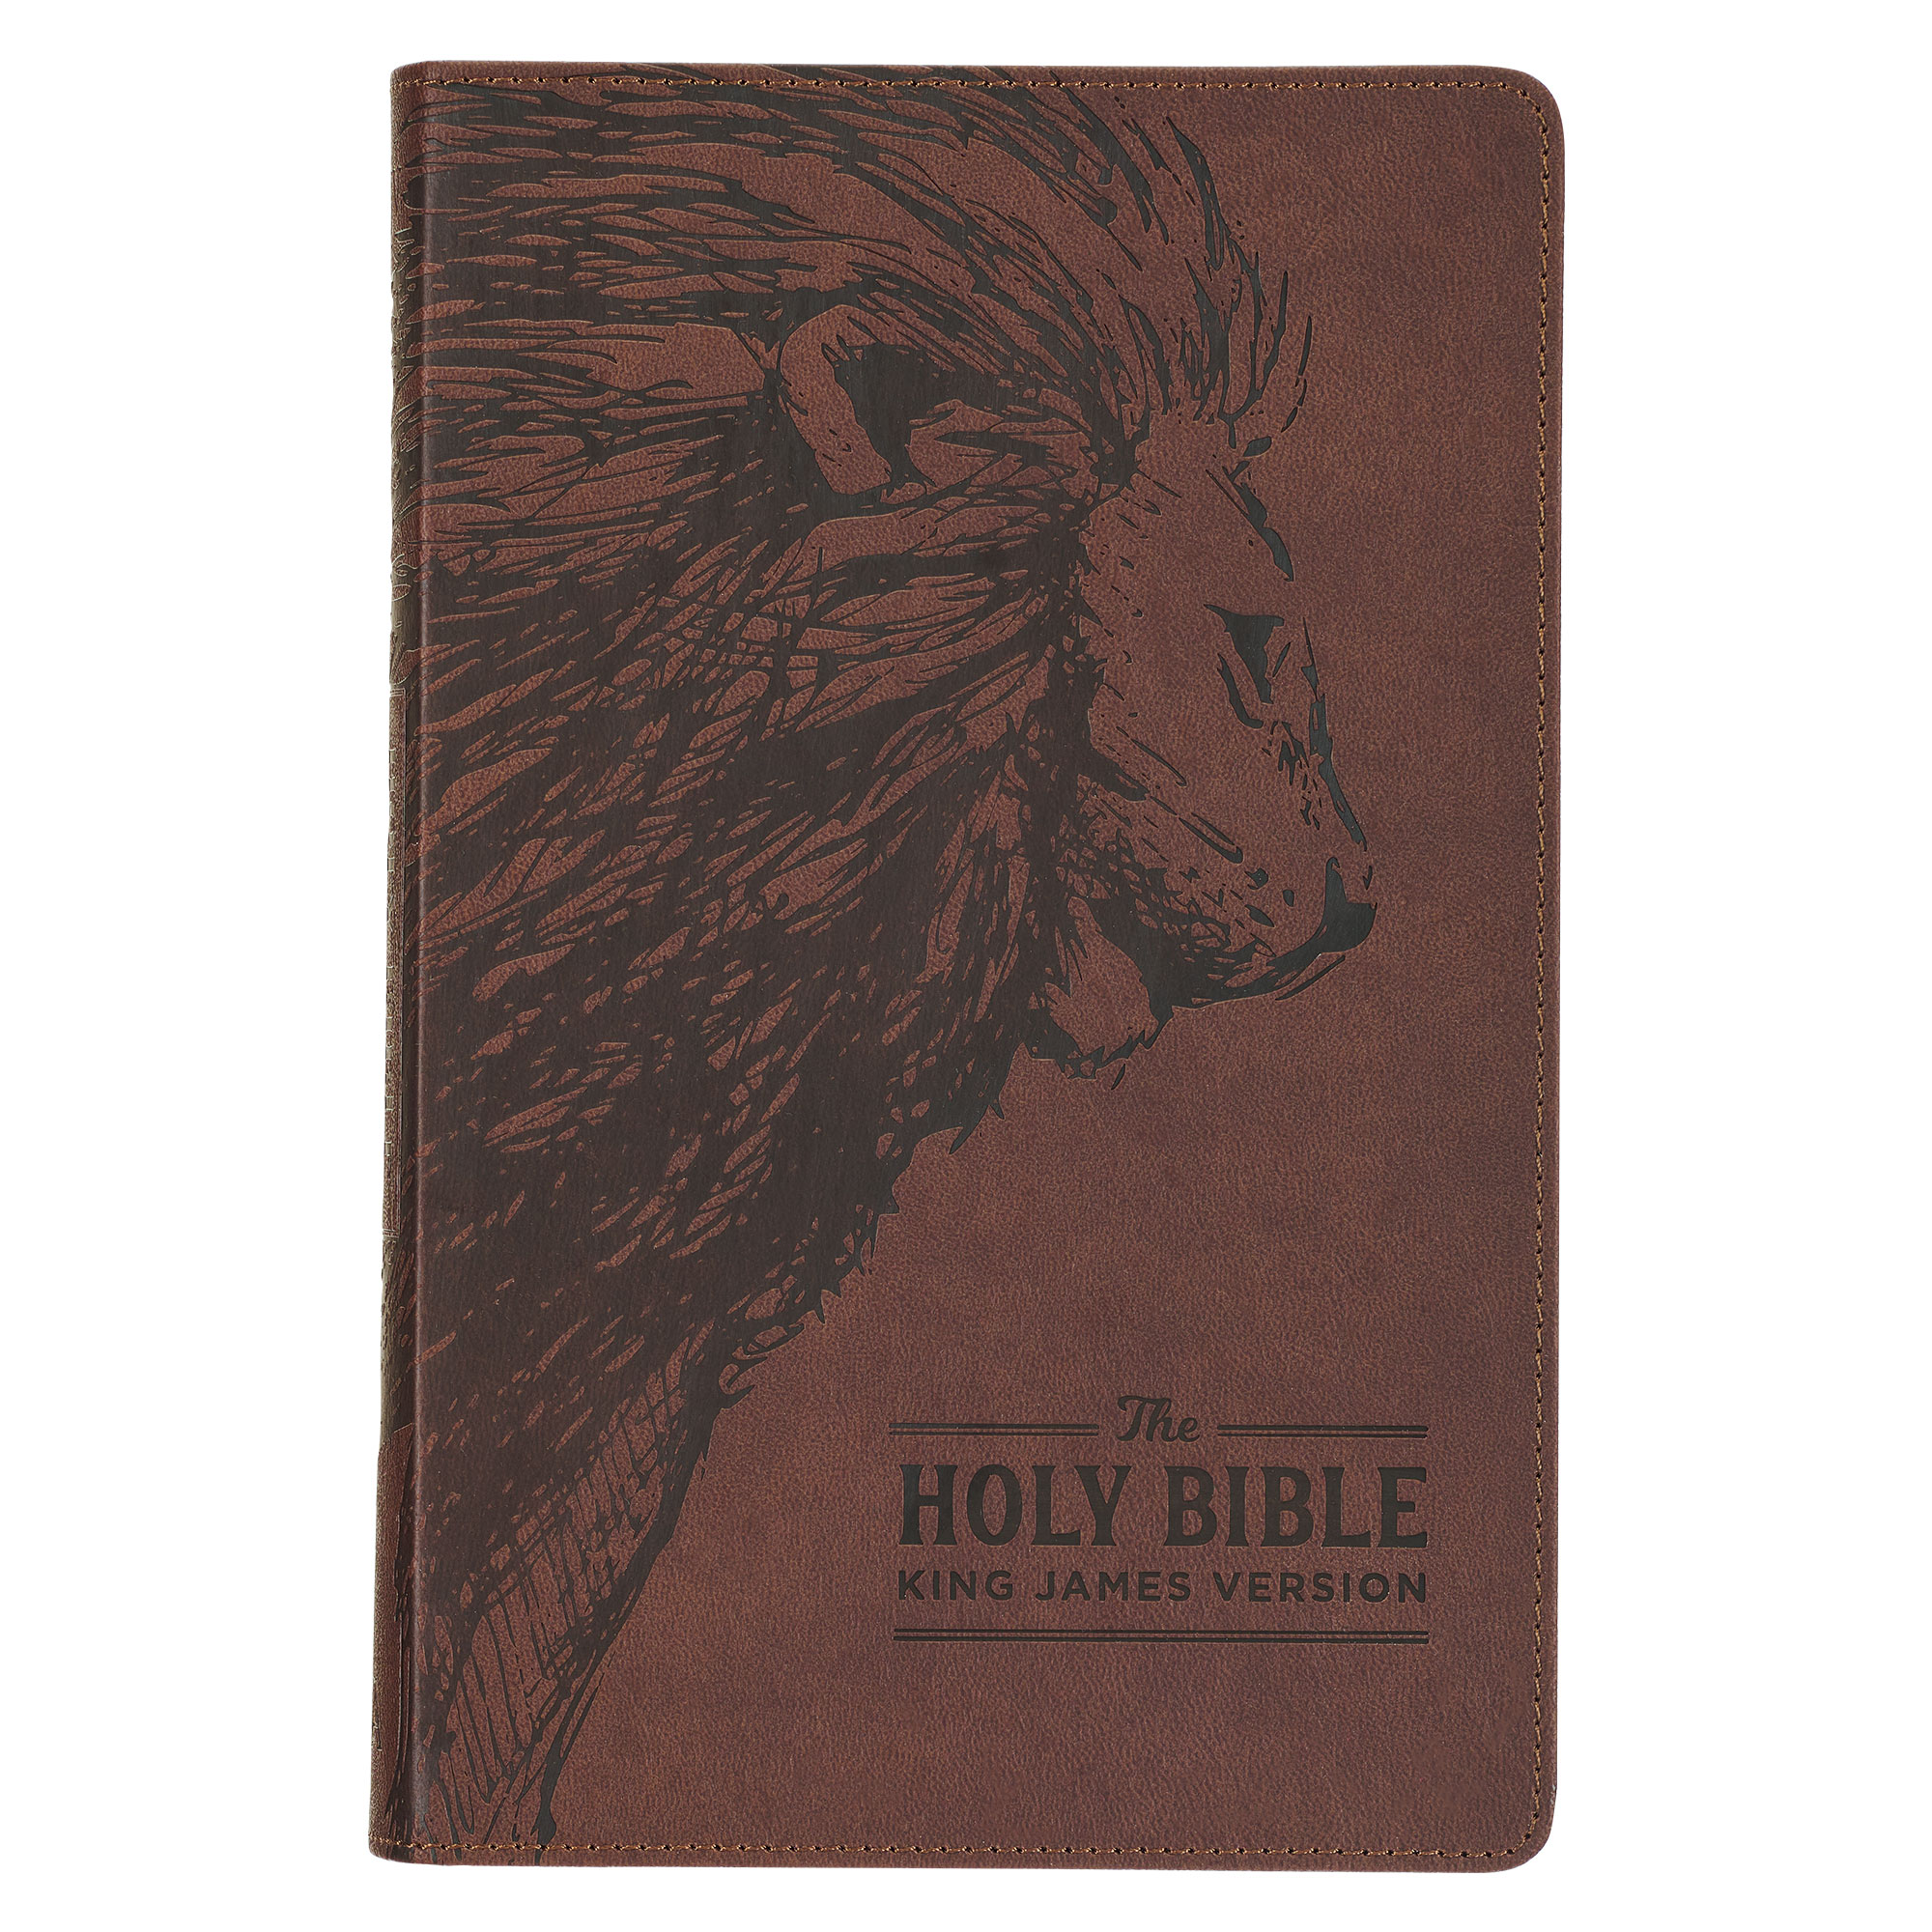 Version,　Bible,　Lion　Red　Thumb　Letter　Brown　James　Standard　Zipper　Marker,　Edition　Ribbon　(Hardcover)　Leather　Size　Faux　Holy　KJV　Closure　Index　King